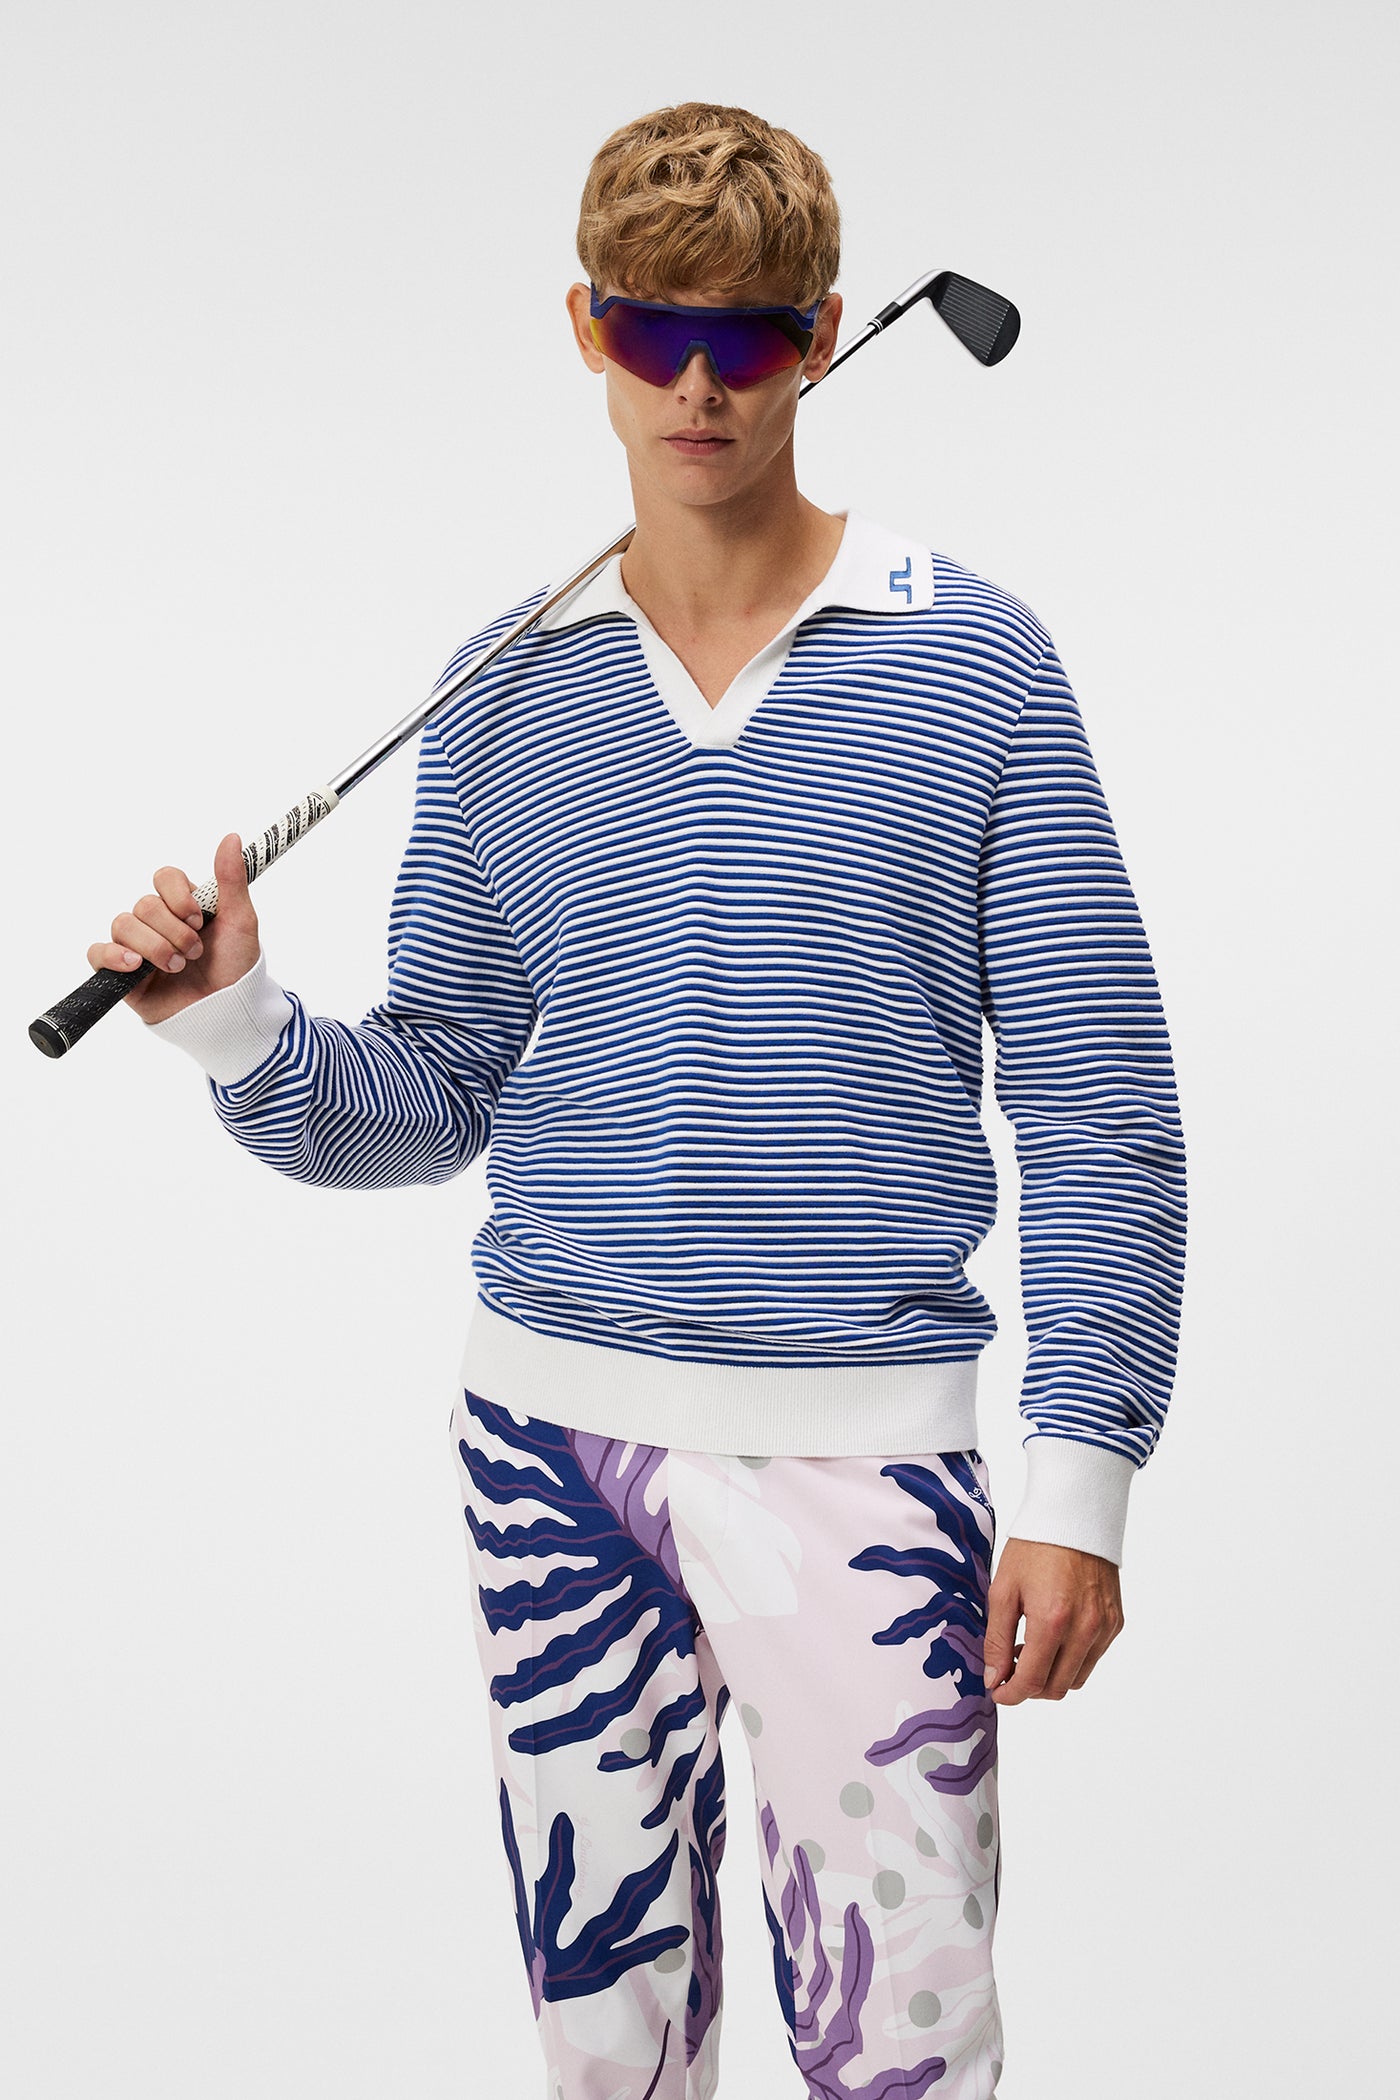 Our favorite golf sweaters that are both fashionable and built for the cold